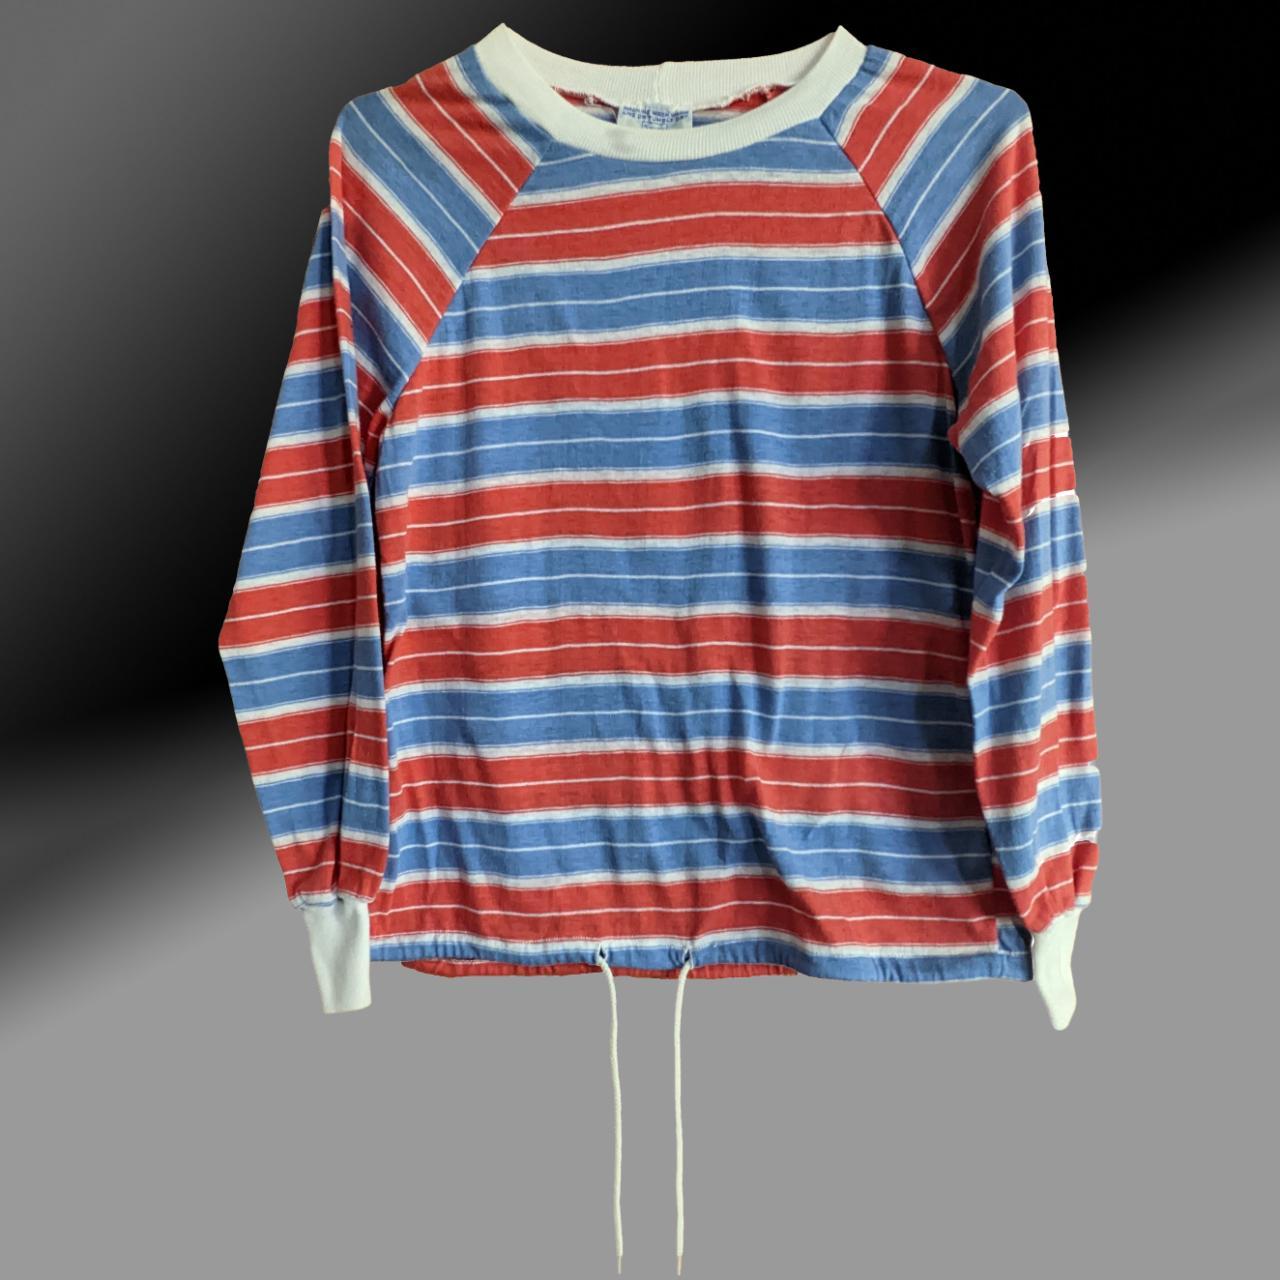 Sears Women's Blue and Red Jumper